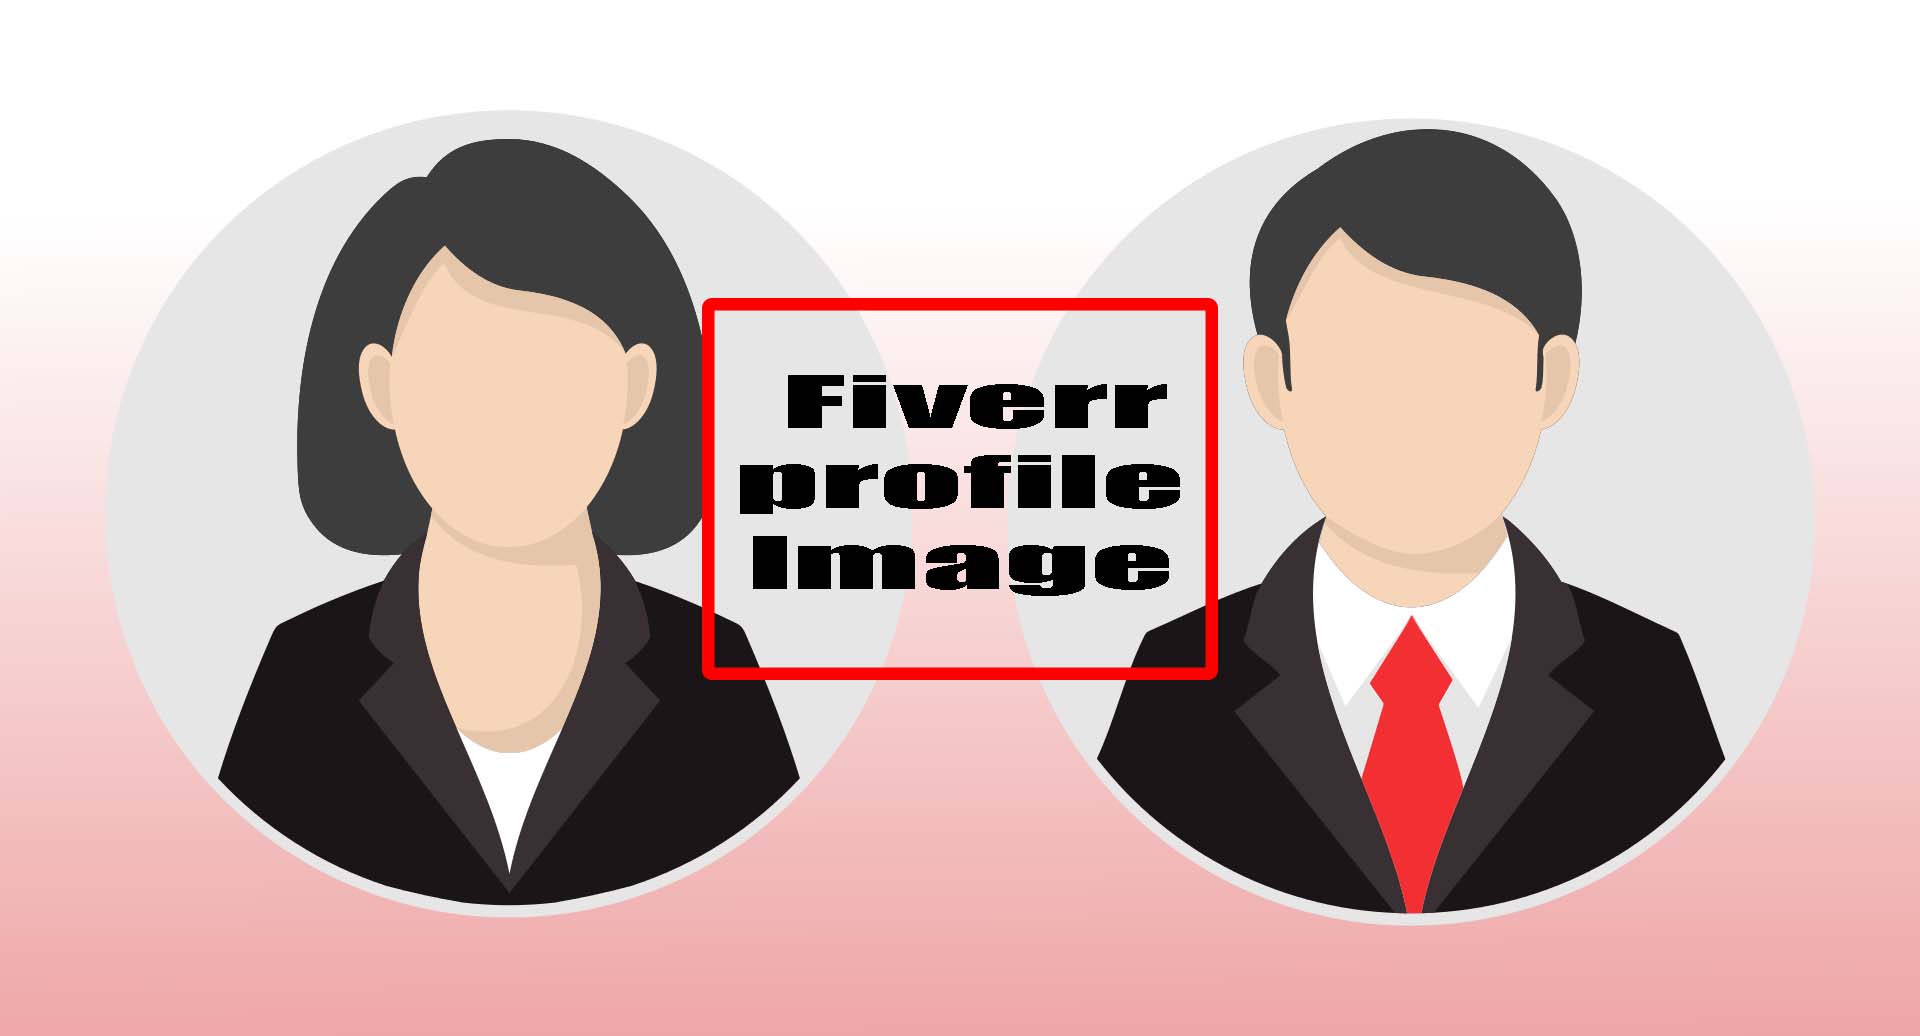 How to upload a Fiverr profile image